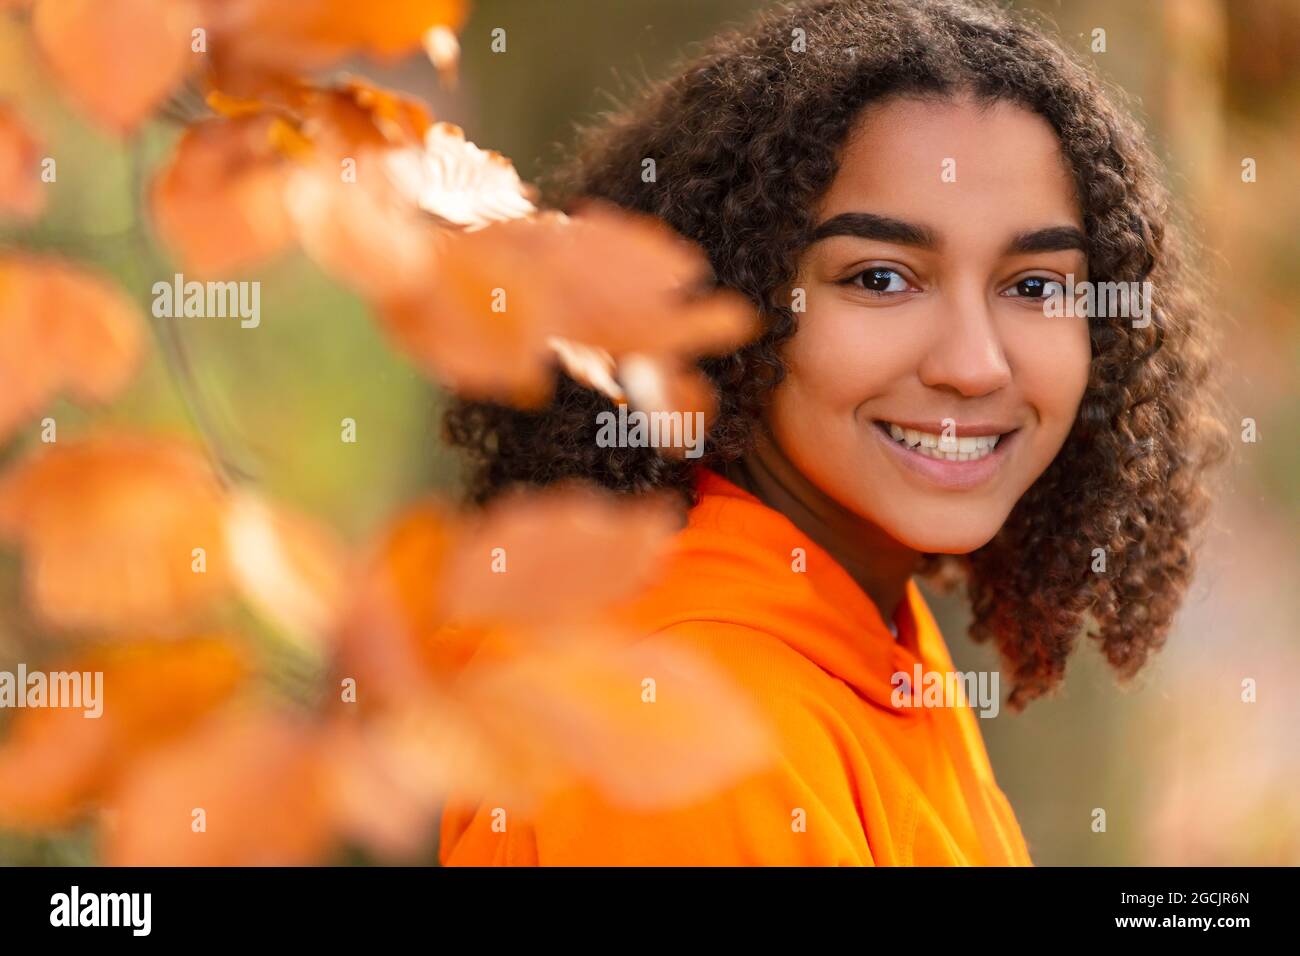 Outdoor portrait of beautiful happy mixed race biracial African American girl teenager female young woman smiling with perfect teeth wearing an orange Stock Photo